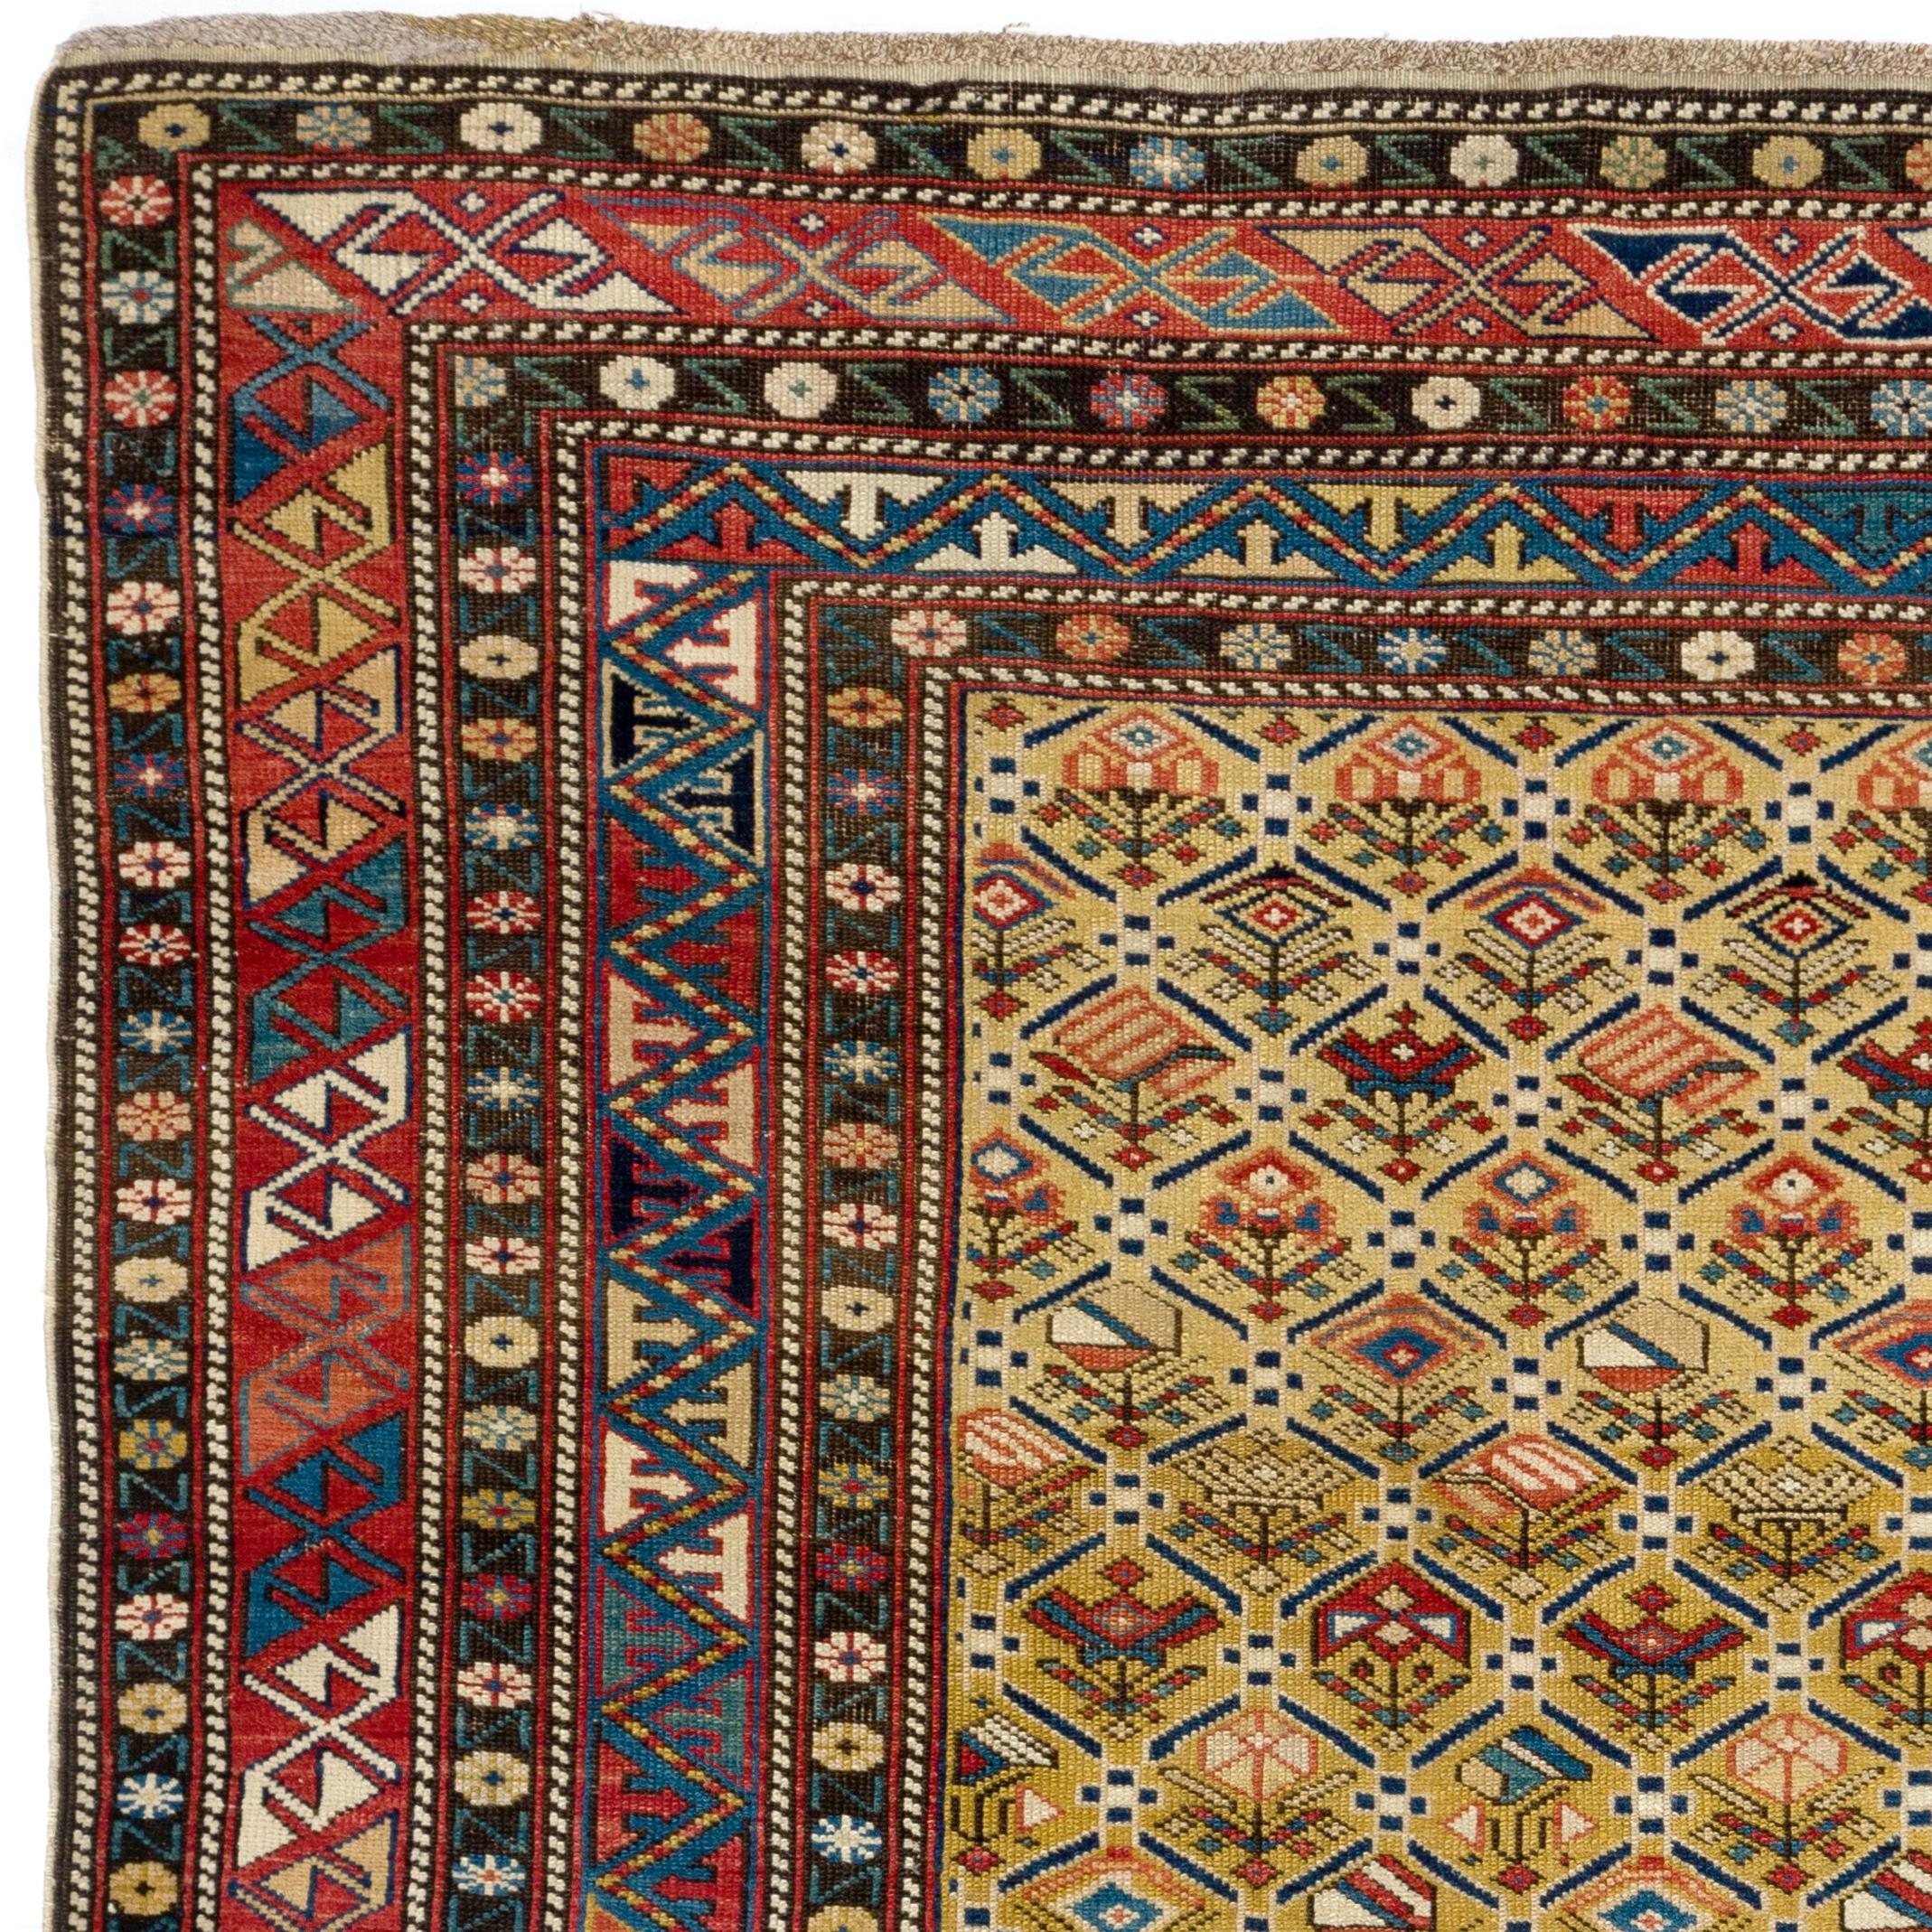 Fine antique Caucasian Shirvan rug, All natural dyes.
Excellent original condition. Sturdy and as clean as a brand new rug (deep washed professionally). 
Size: 4 x 5.5 ft.